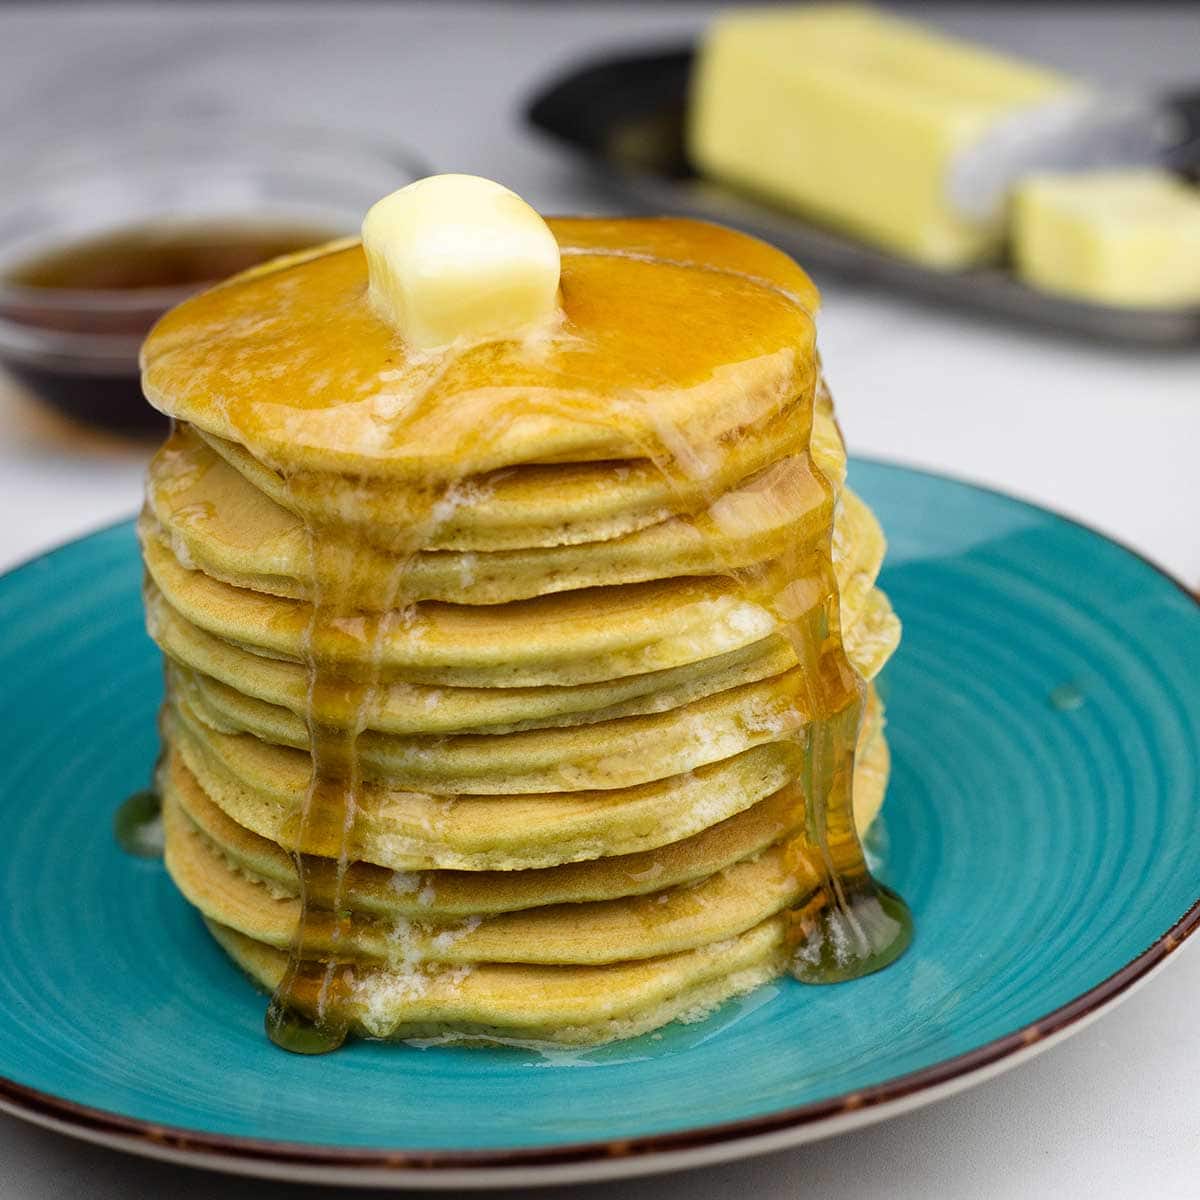 Keto pancakes stacked on a blue plate with butter and syrup dripping down the sides